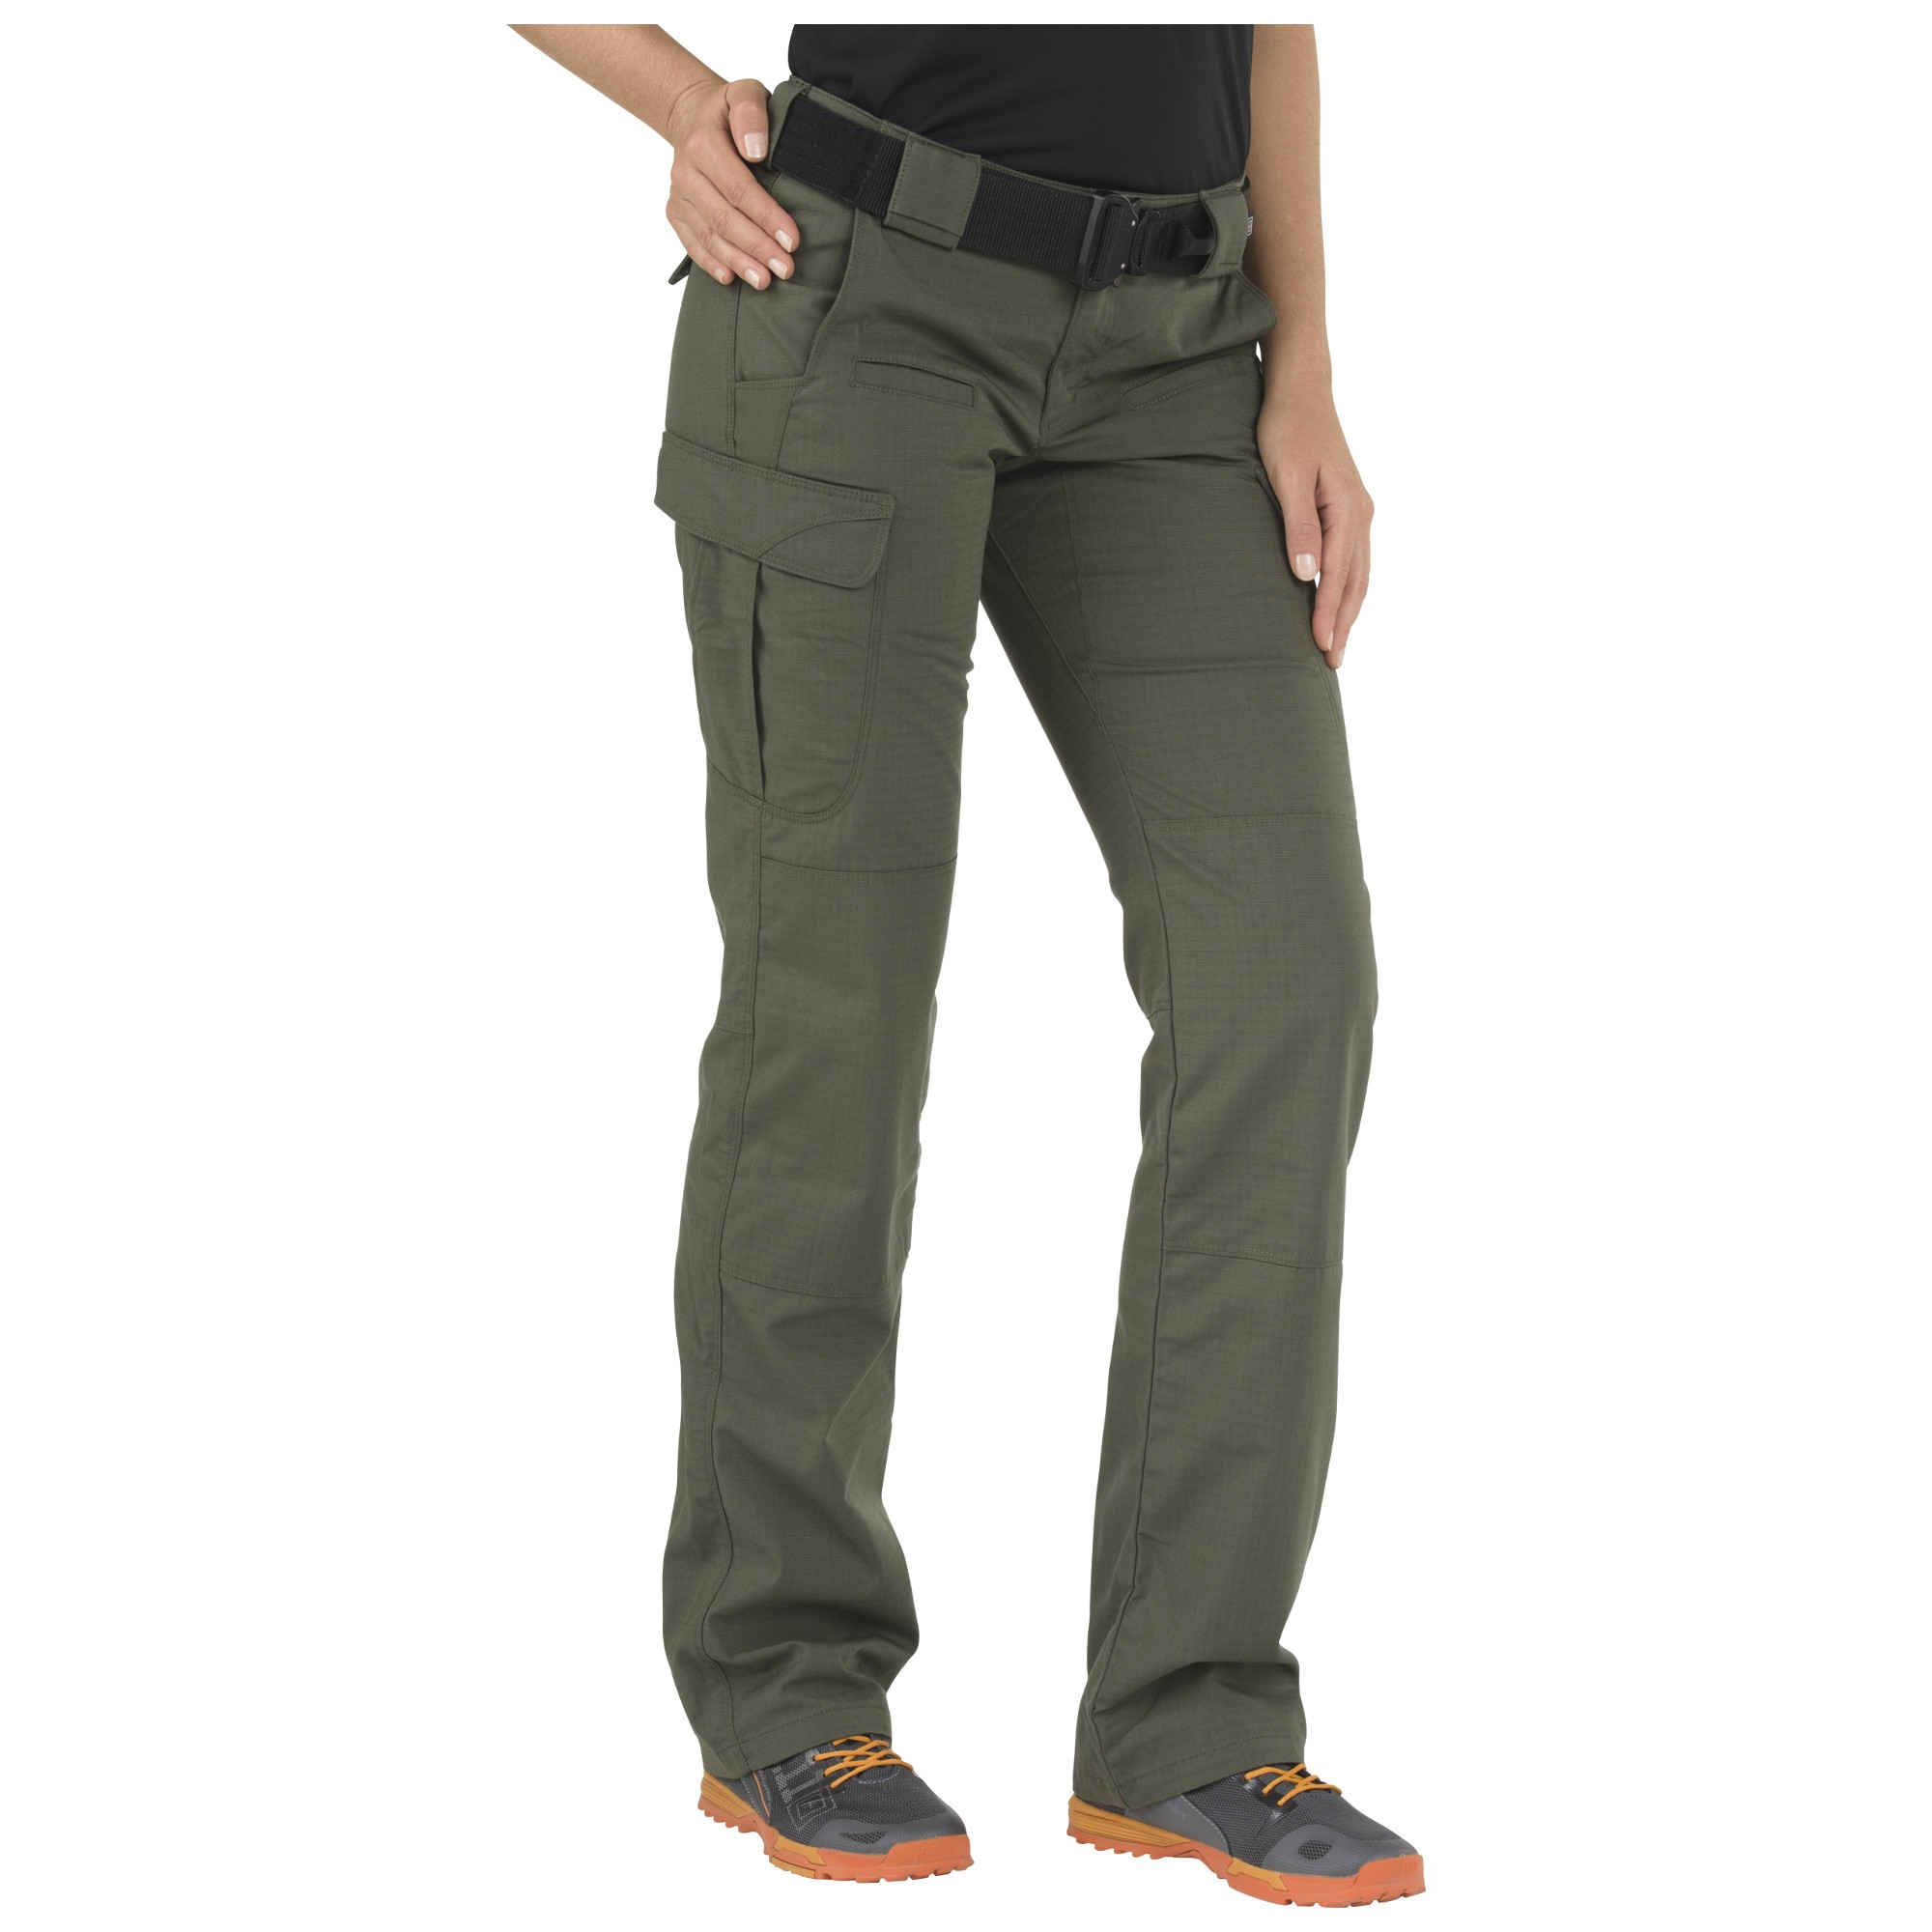 Stretchable 5.11 Tactical Women's Stryke Covert Cargo Pants Style 64386 Gusseted Construction 